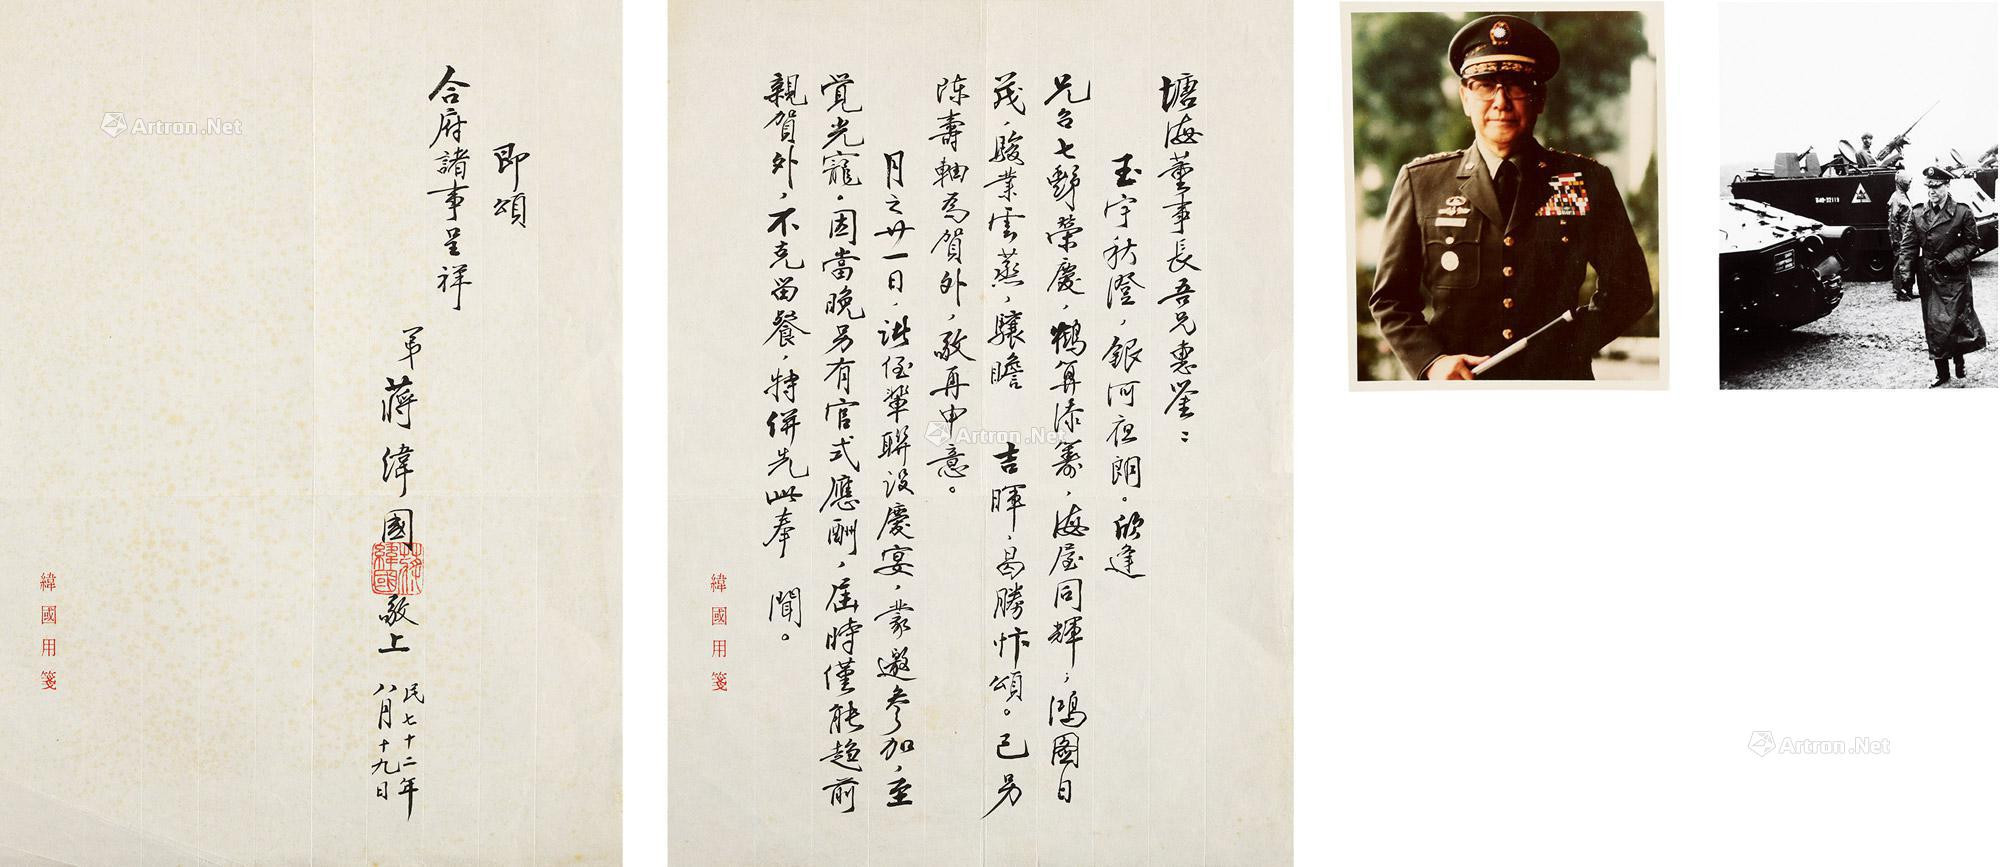 One Letter of two Pages by Chiang Wei-kuo， Attached with Information Photos